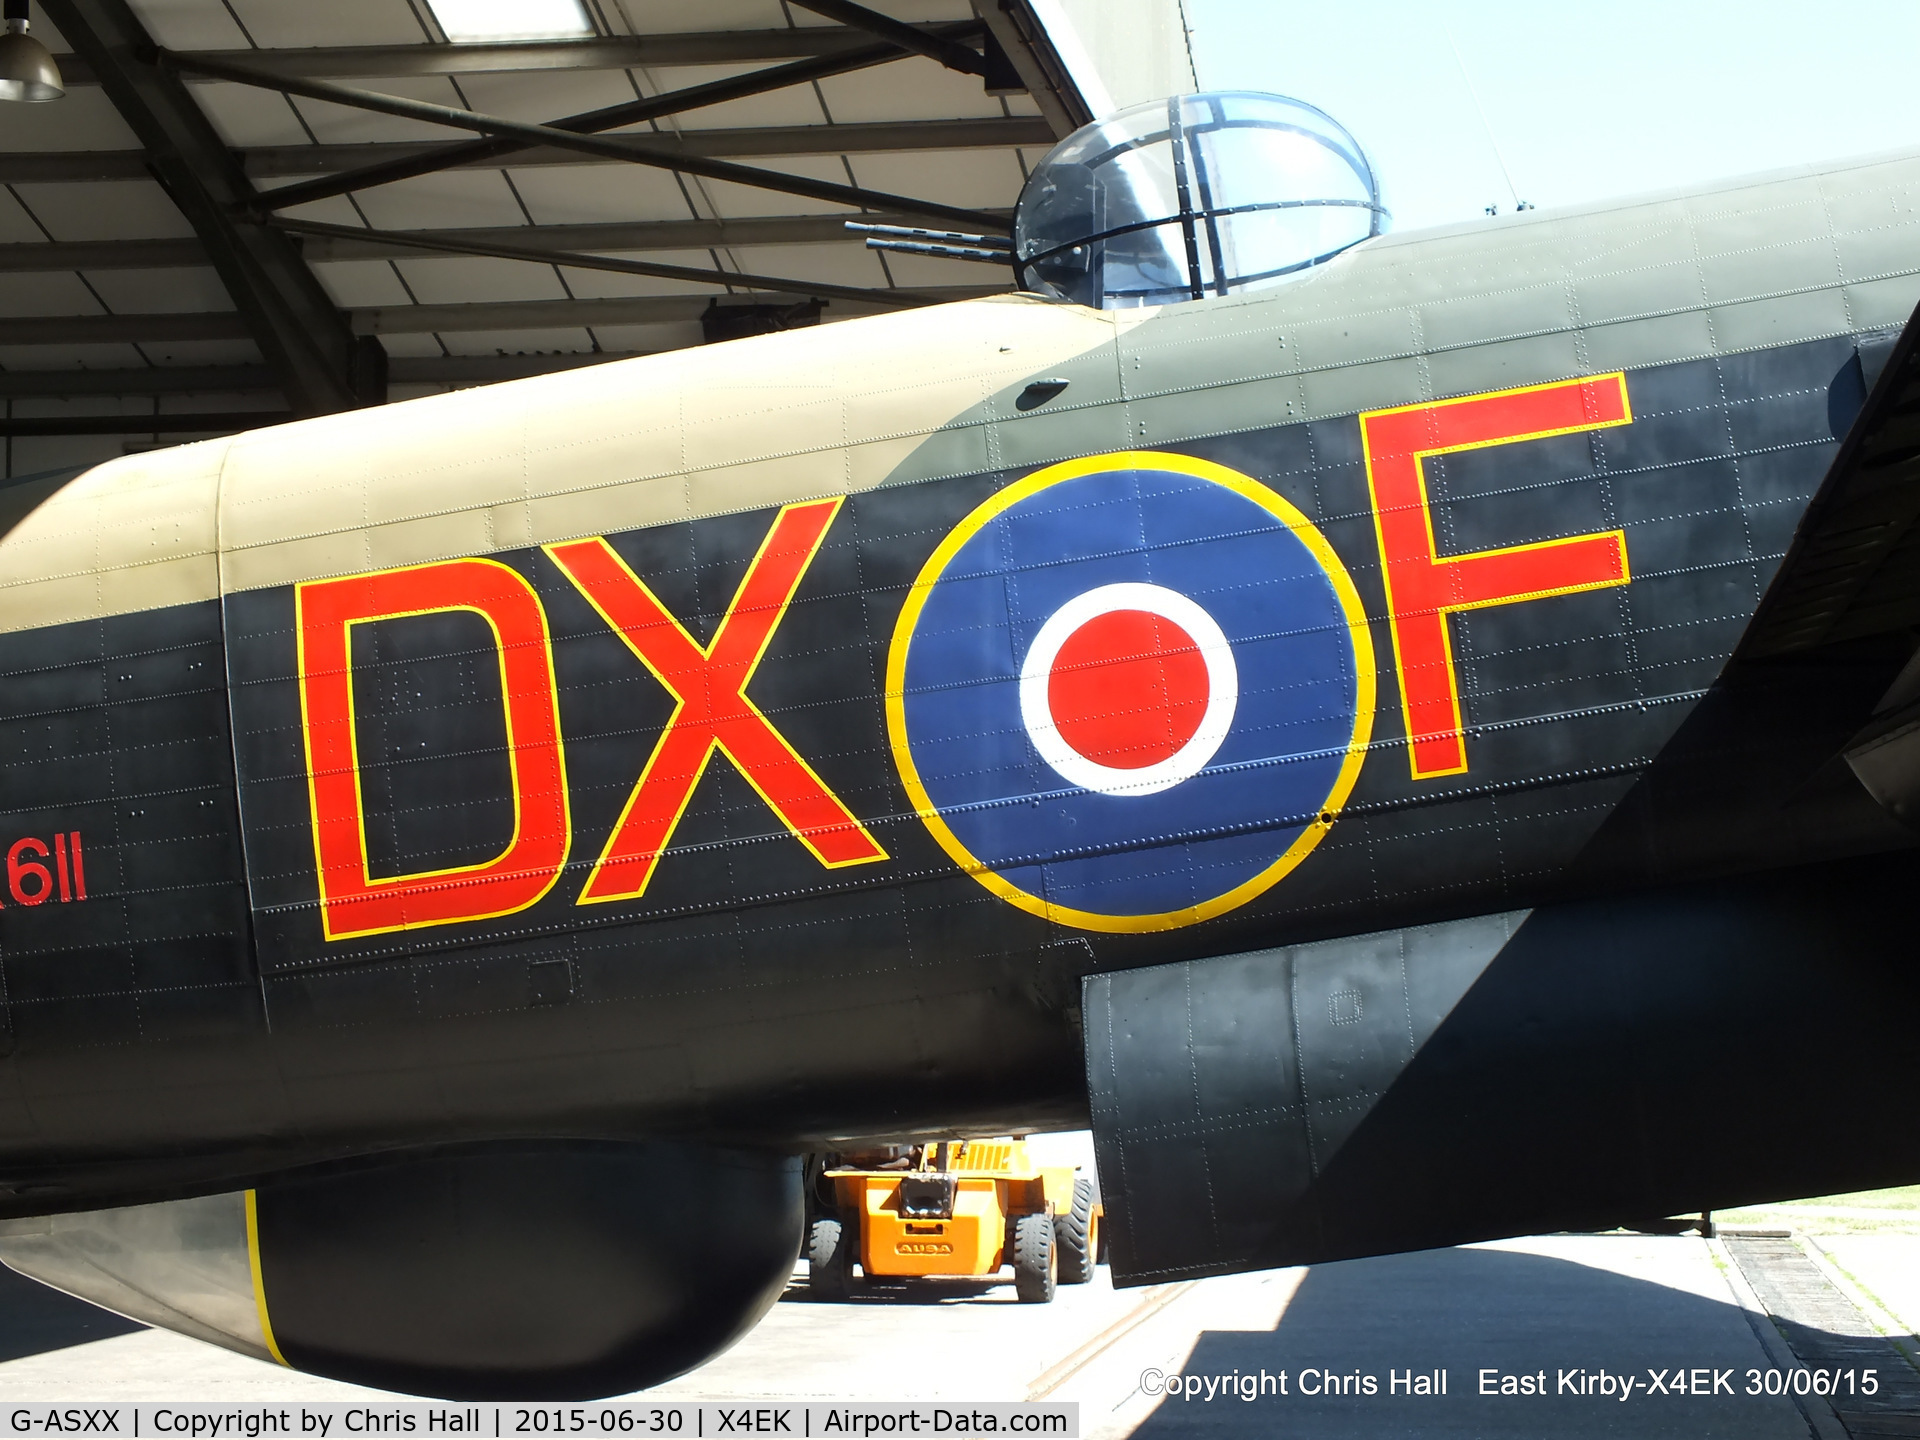 G-ASXX, 1945 Avro 683 Lancaster B7 C/N Not found NX611, at the Lincolnshire Aviation Heritage Centre, RAF East Kirkby